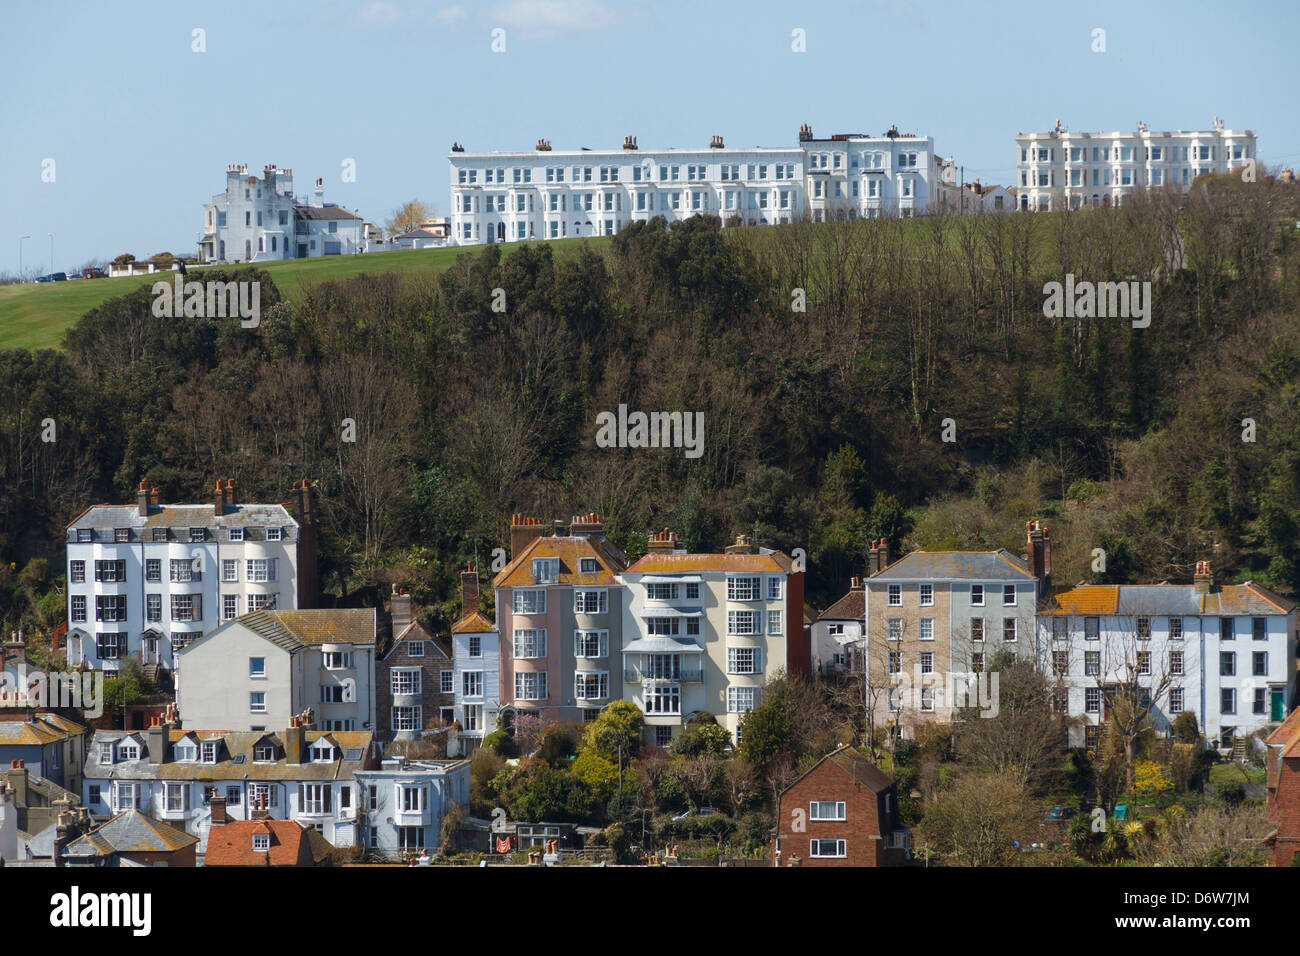 The seaside town of Hastings, East Sussex, England. Stock Photo